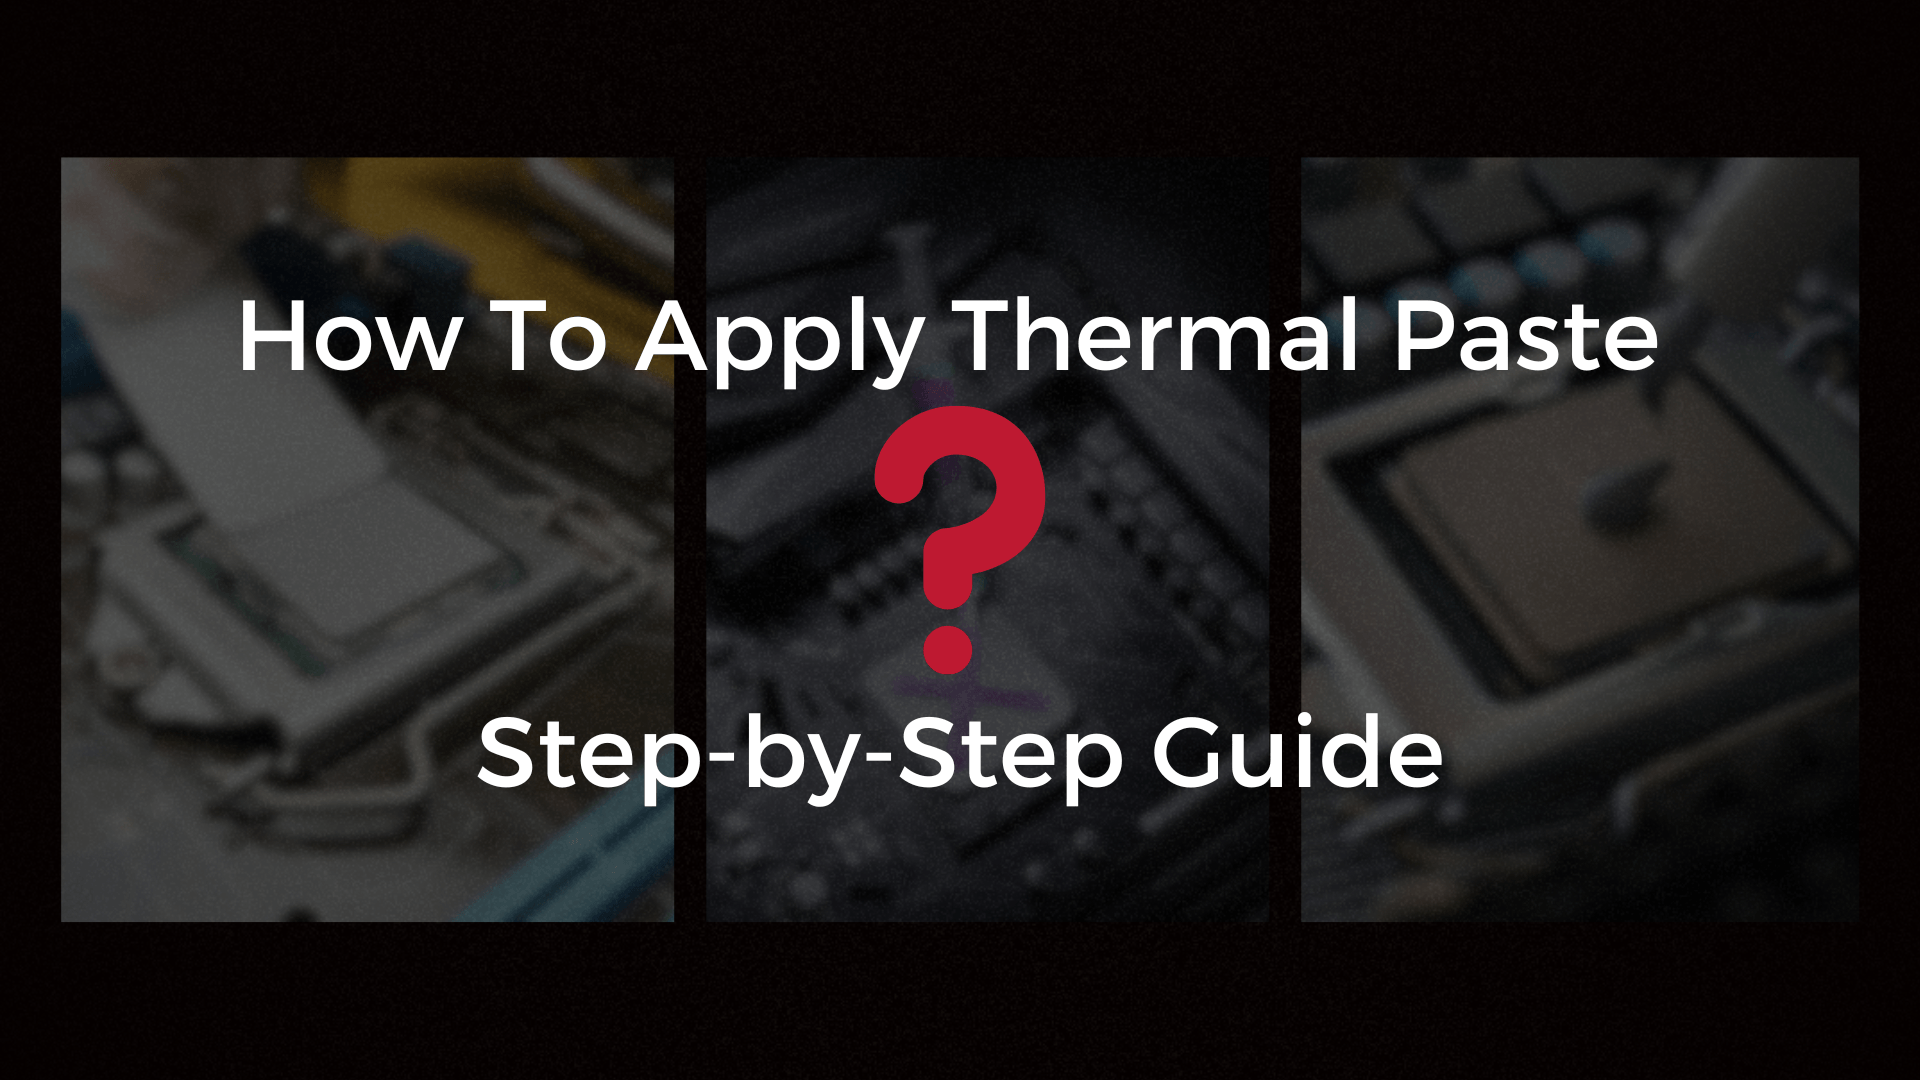 How To Apply Thermal Paste To Your GPU or CPU: Step-by-Step Guide